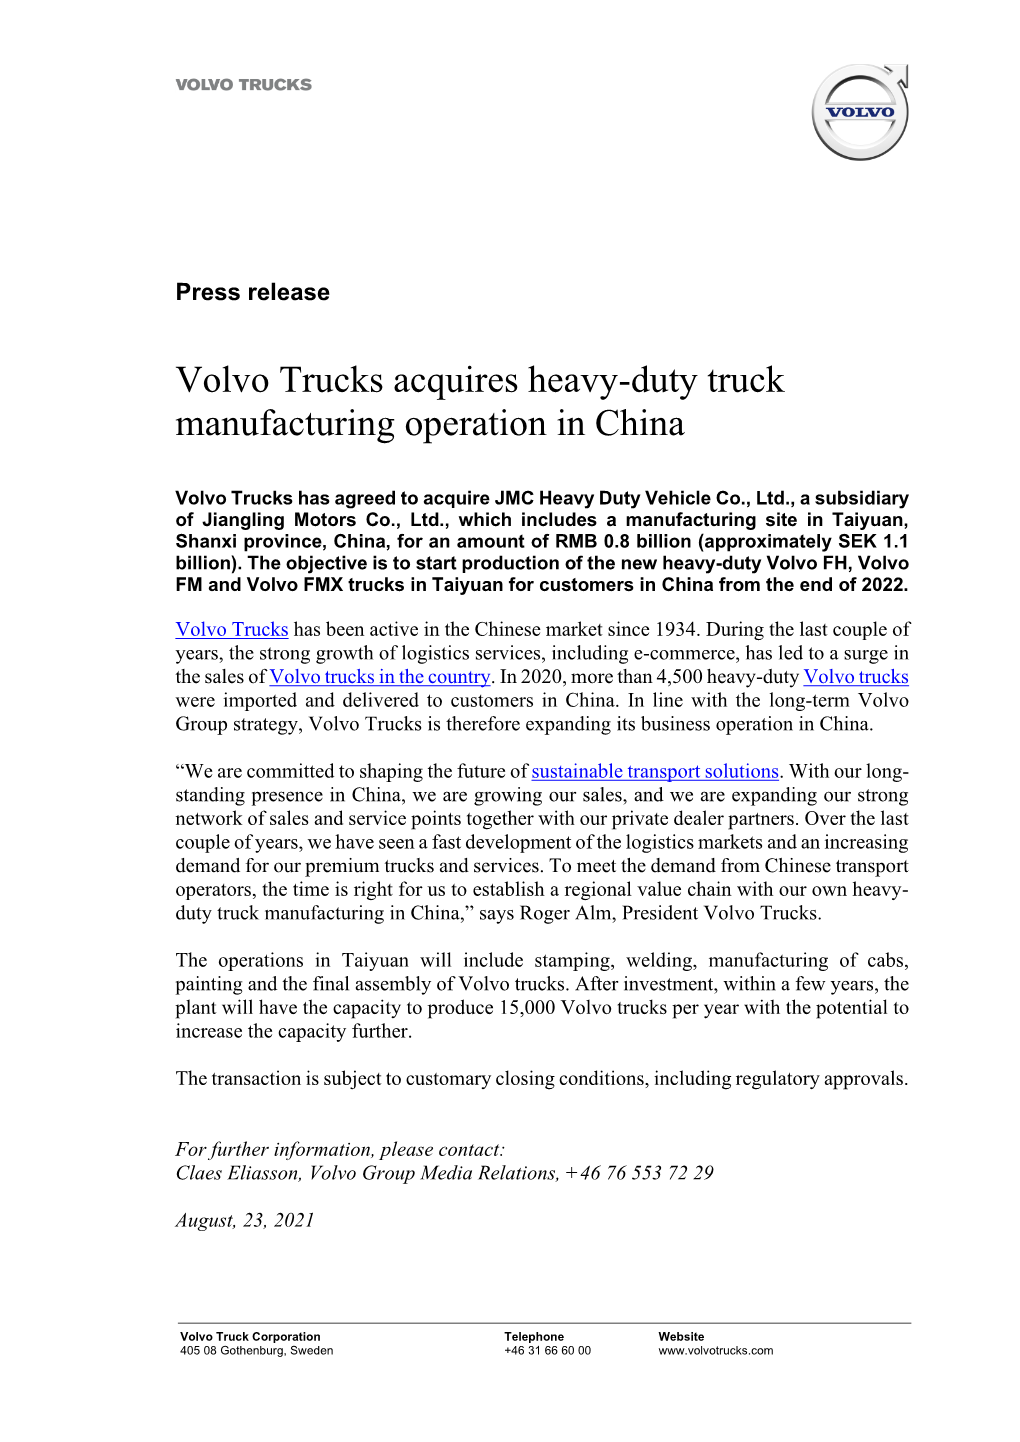 Volvo Trucks Acquires Heavy-Duty Truck Manufacturing Operation in China